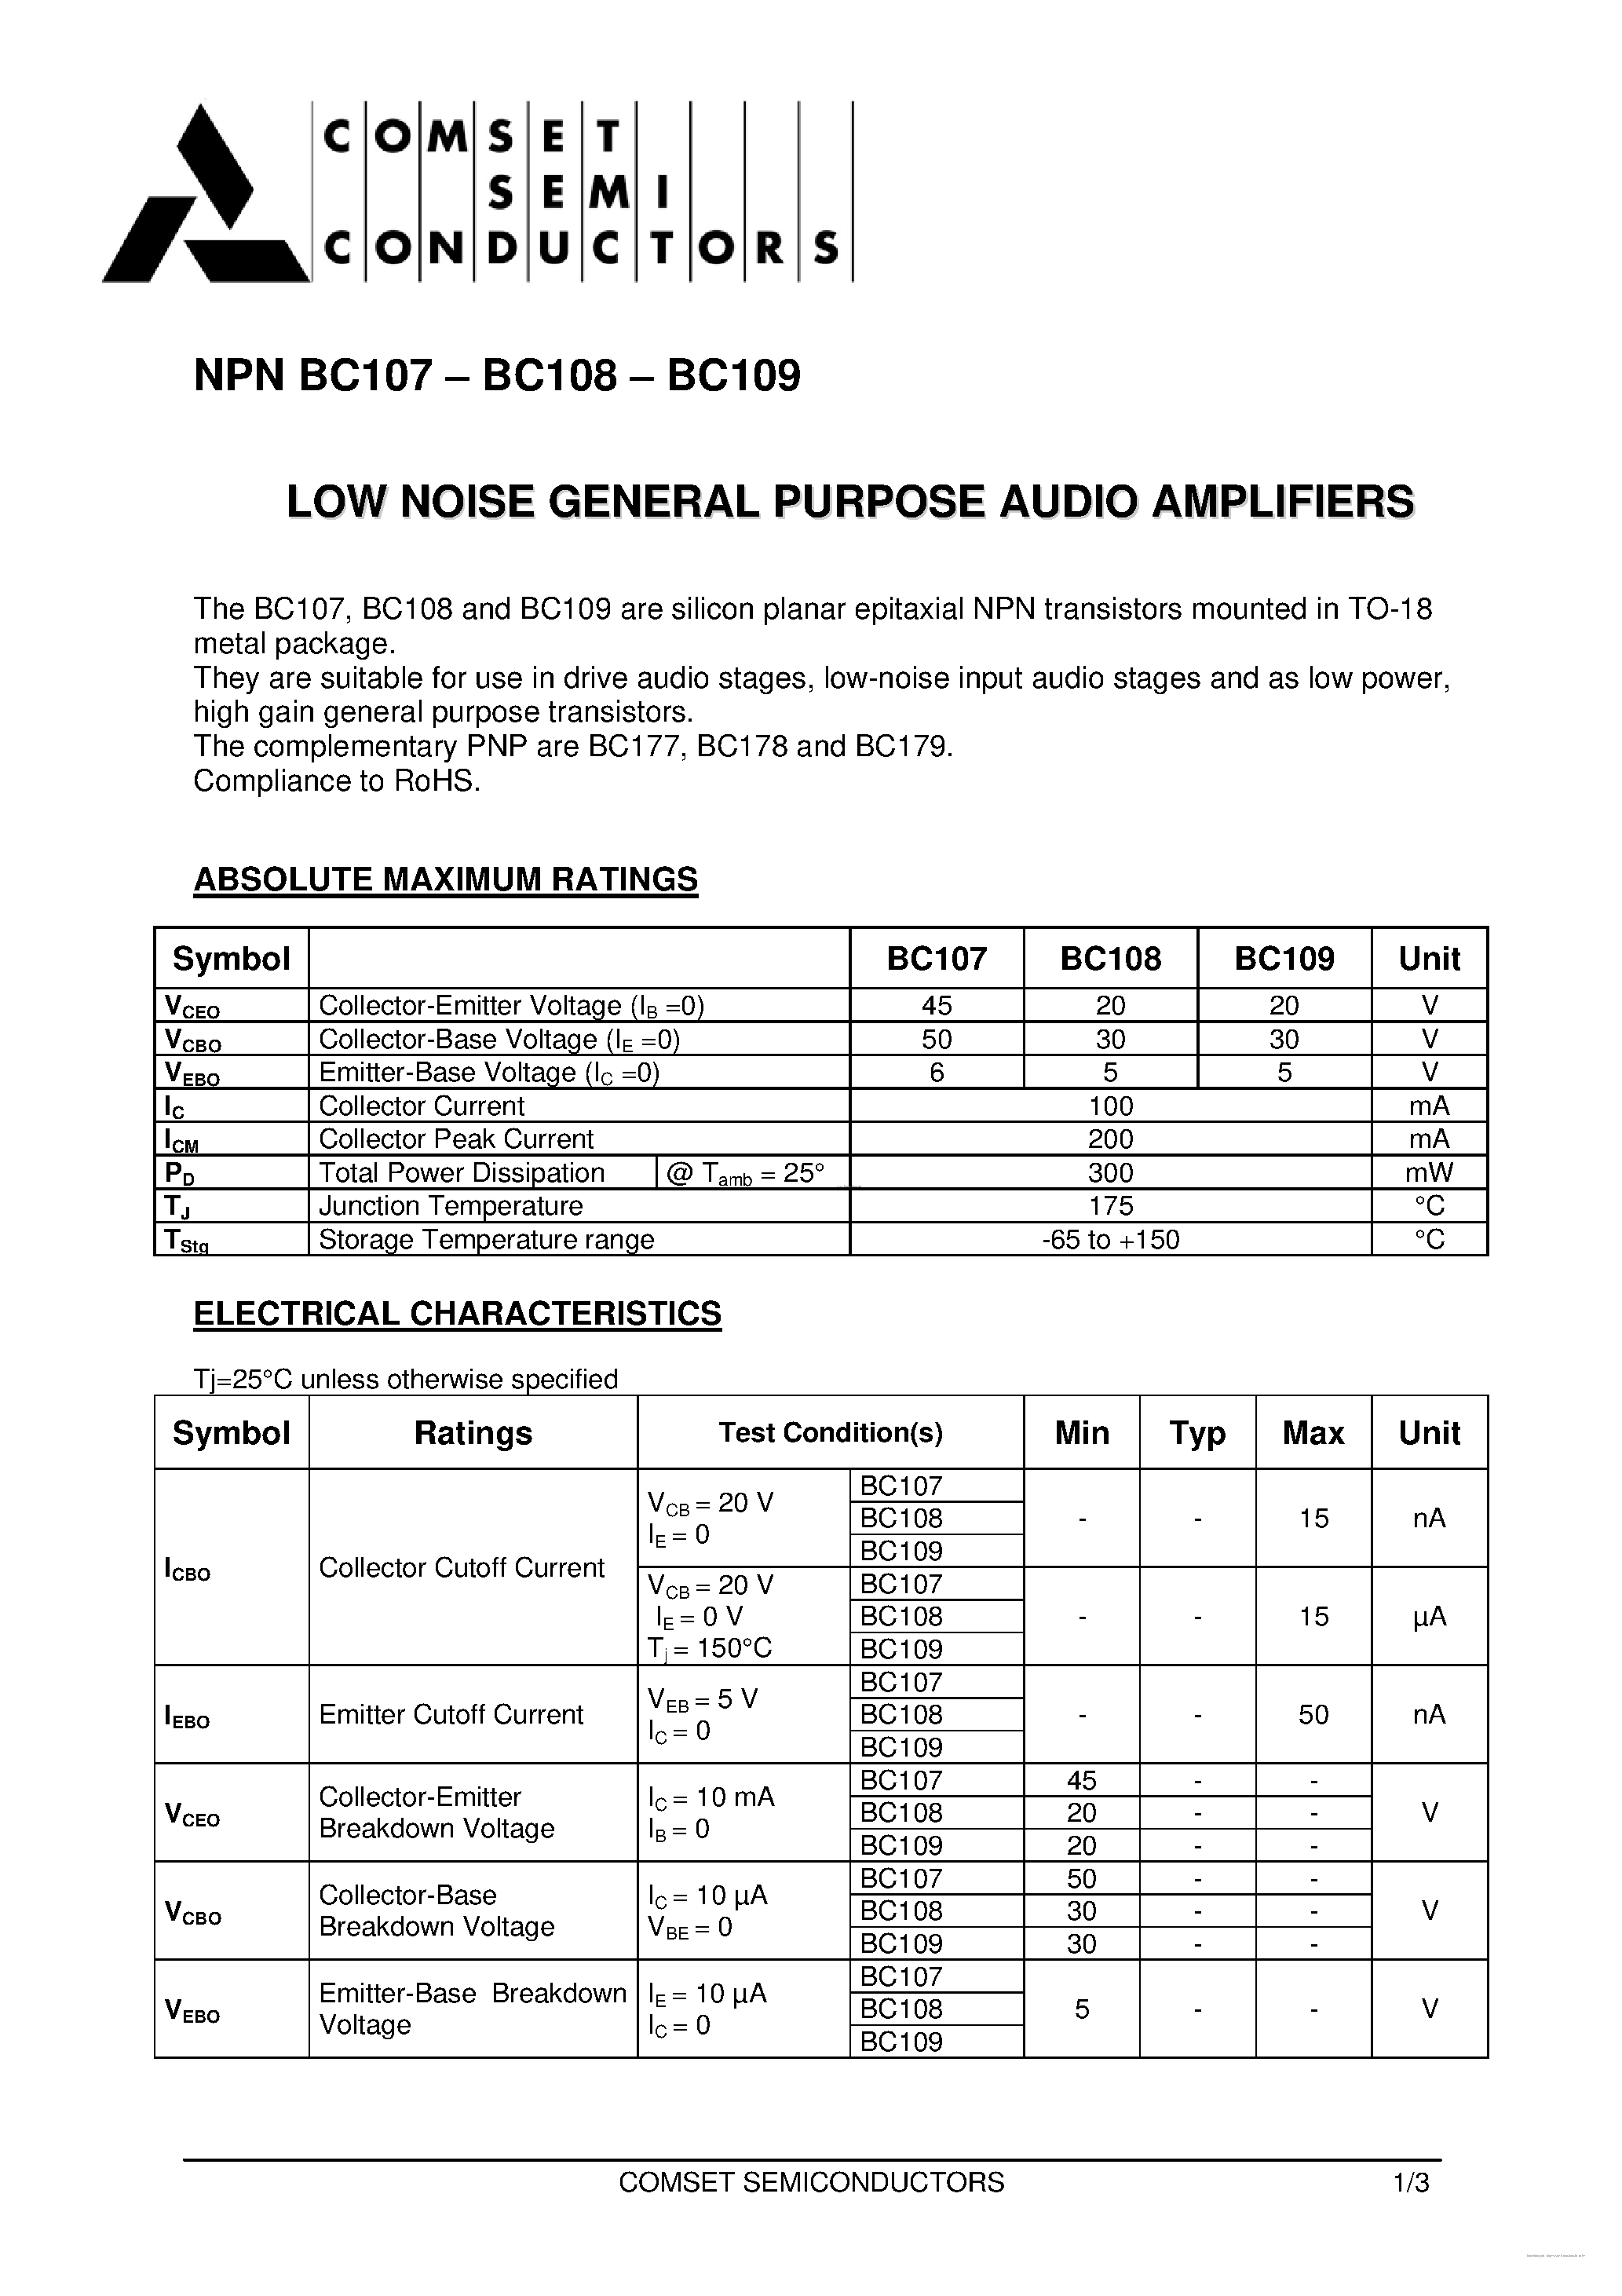 Datasheet BC107 - (BC107 - BC109) Low noise general purpose audio amplifiers page 1